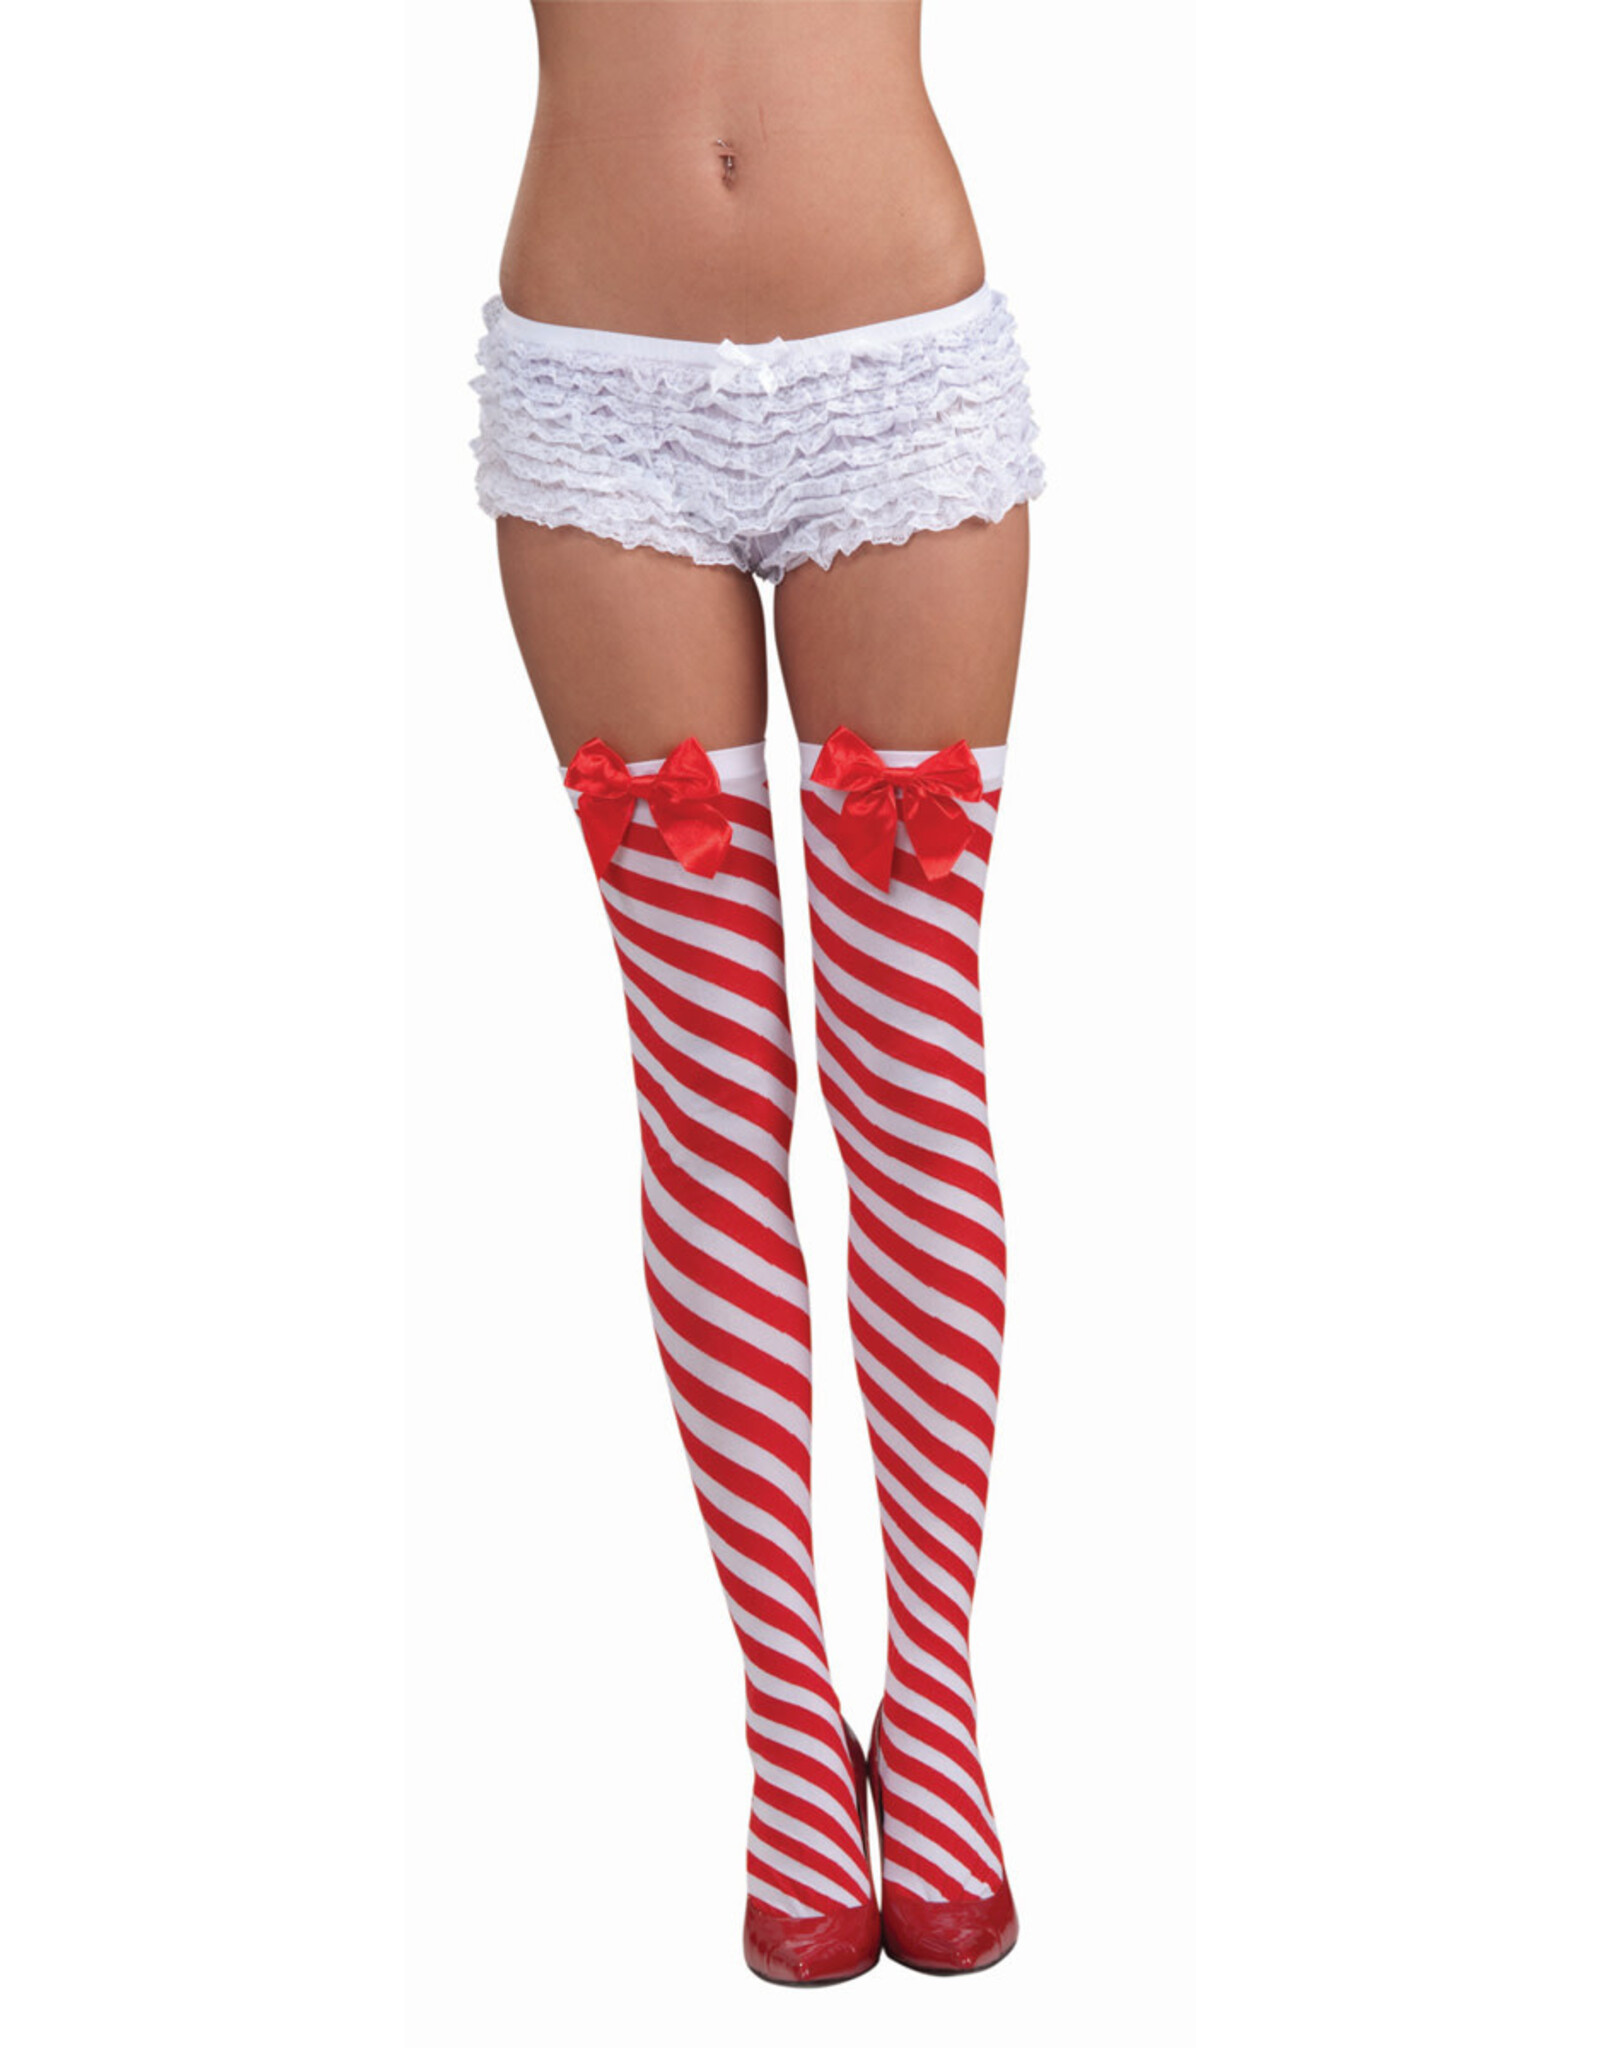 Rubies Costume Candy Cane Thigh High Stockings